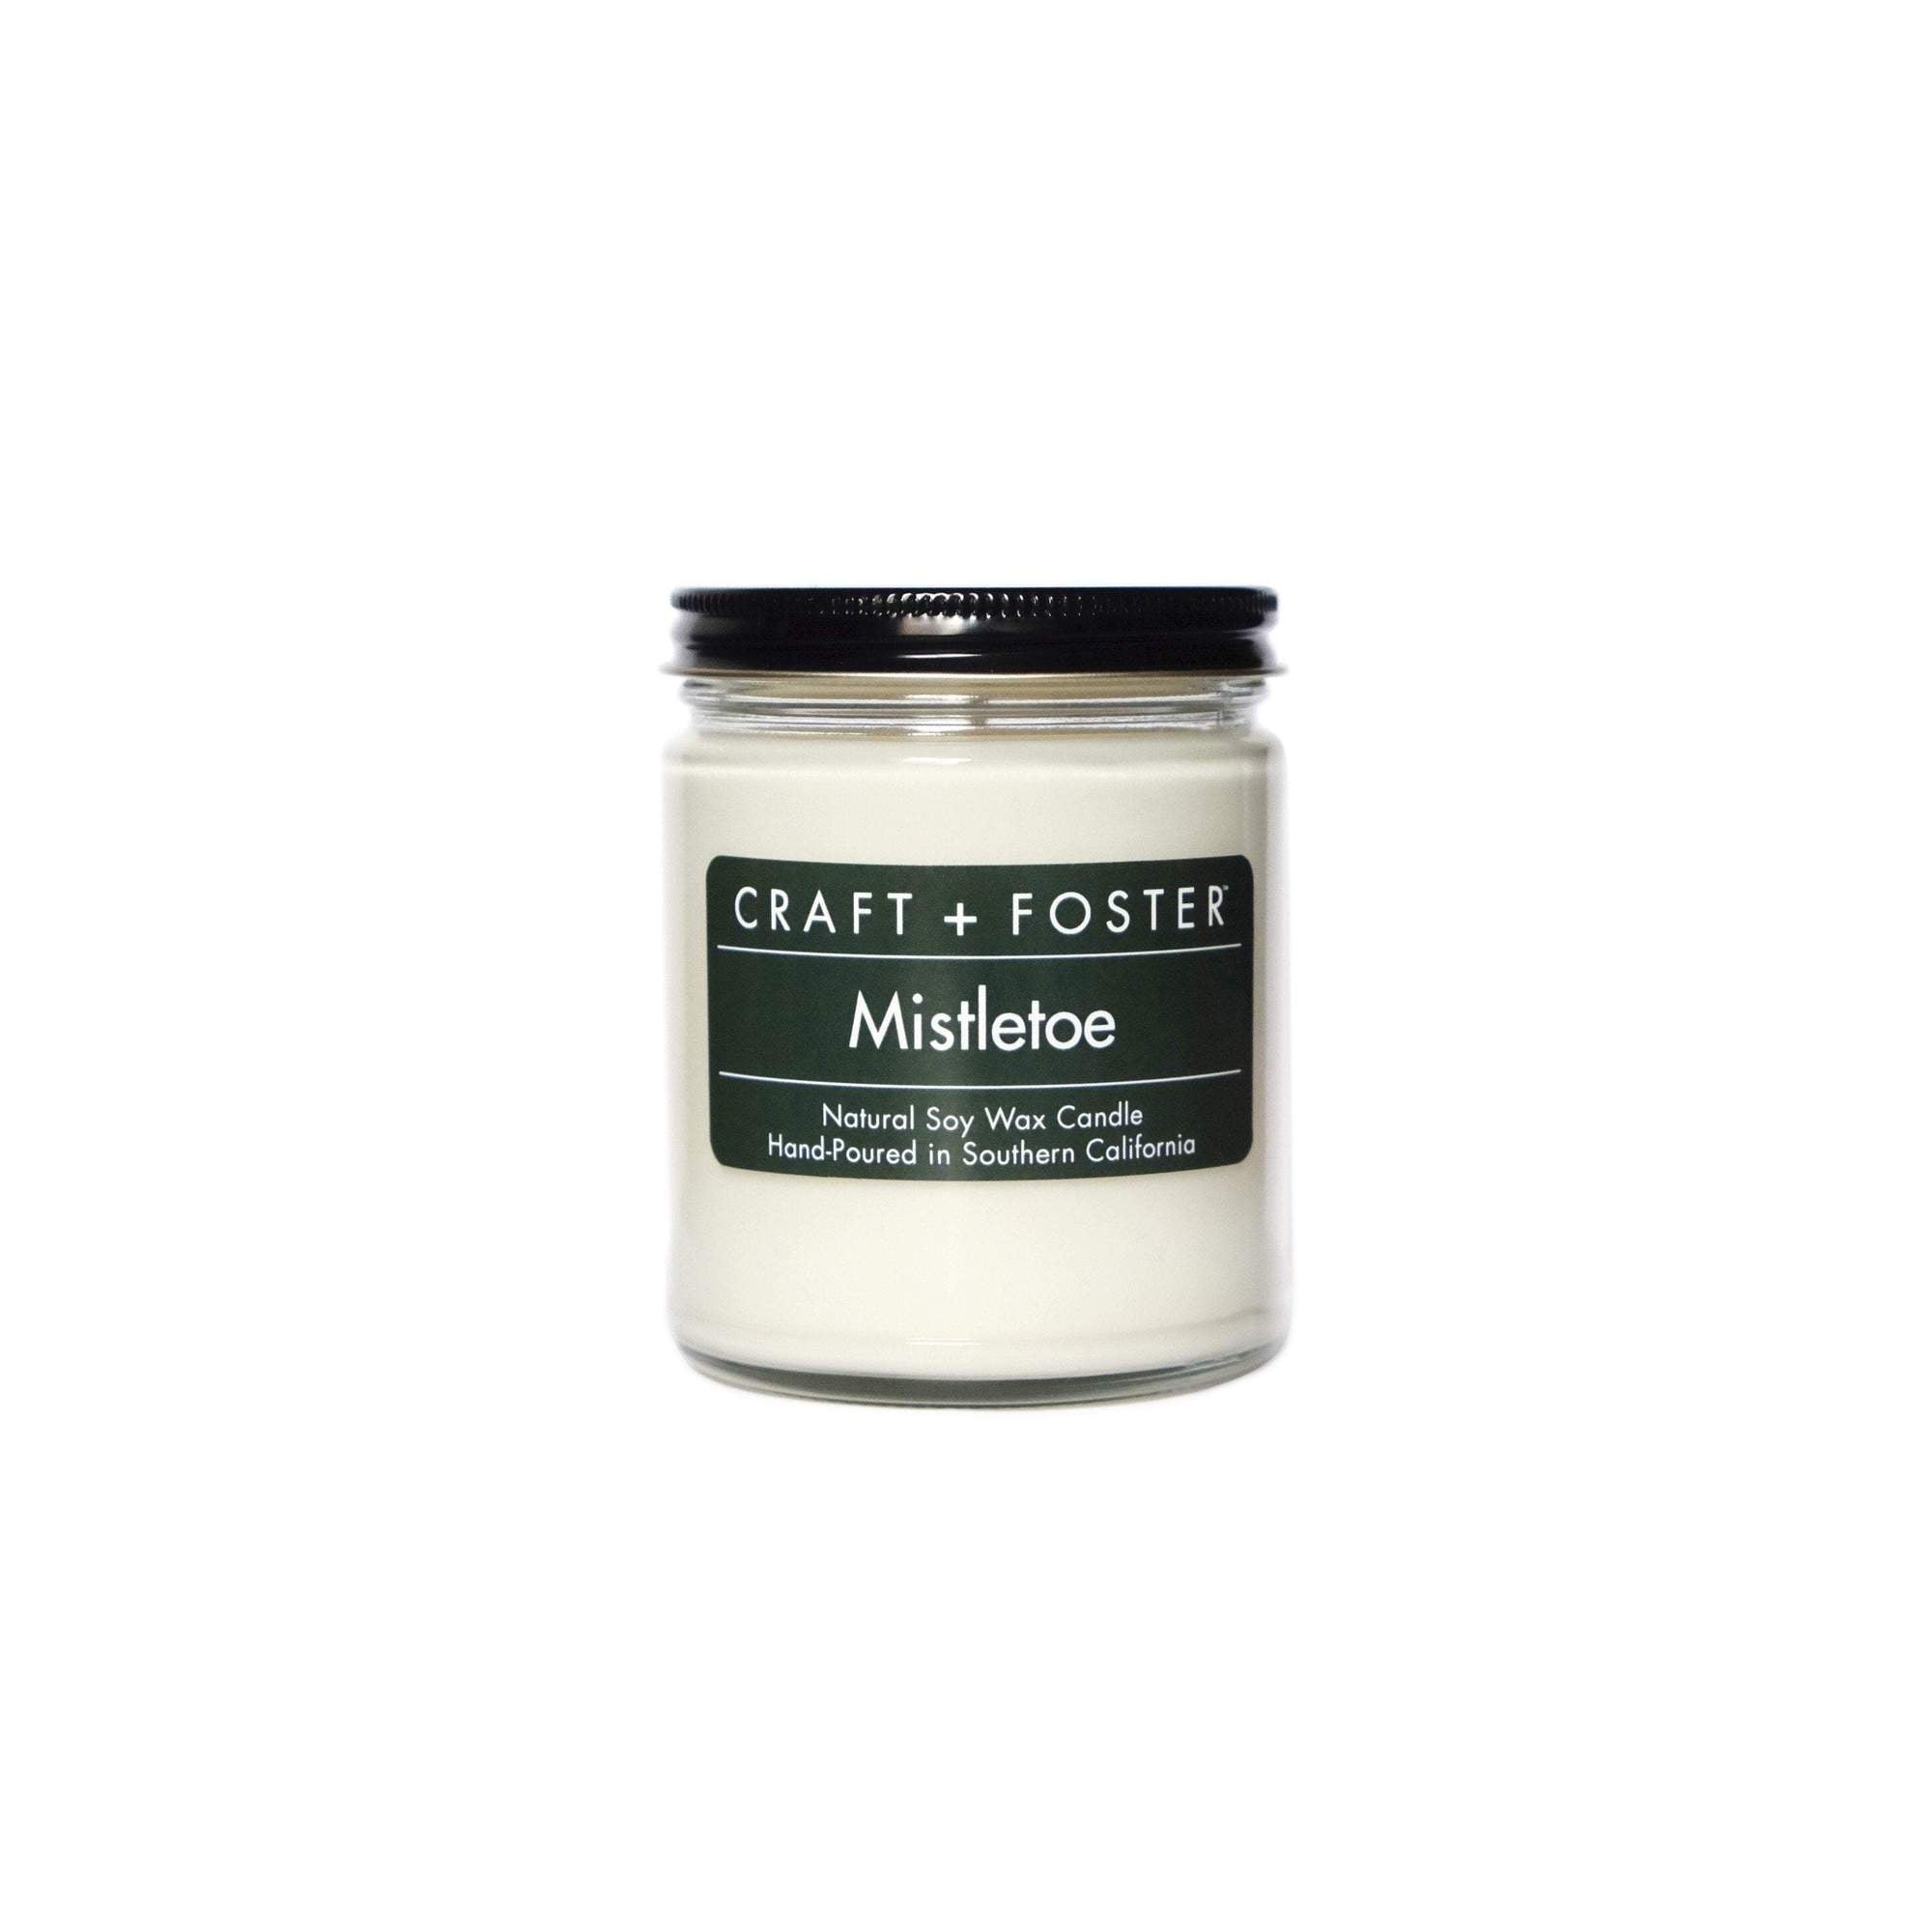 Natural Soy Wax Candle - Mistletoe